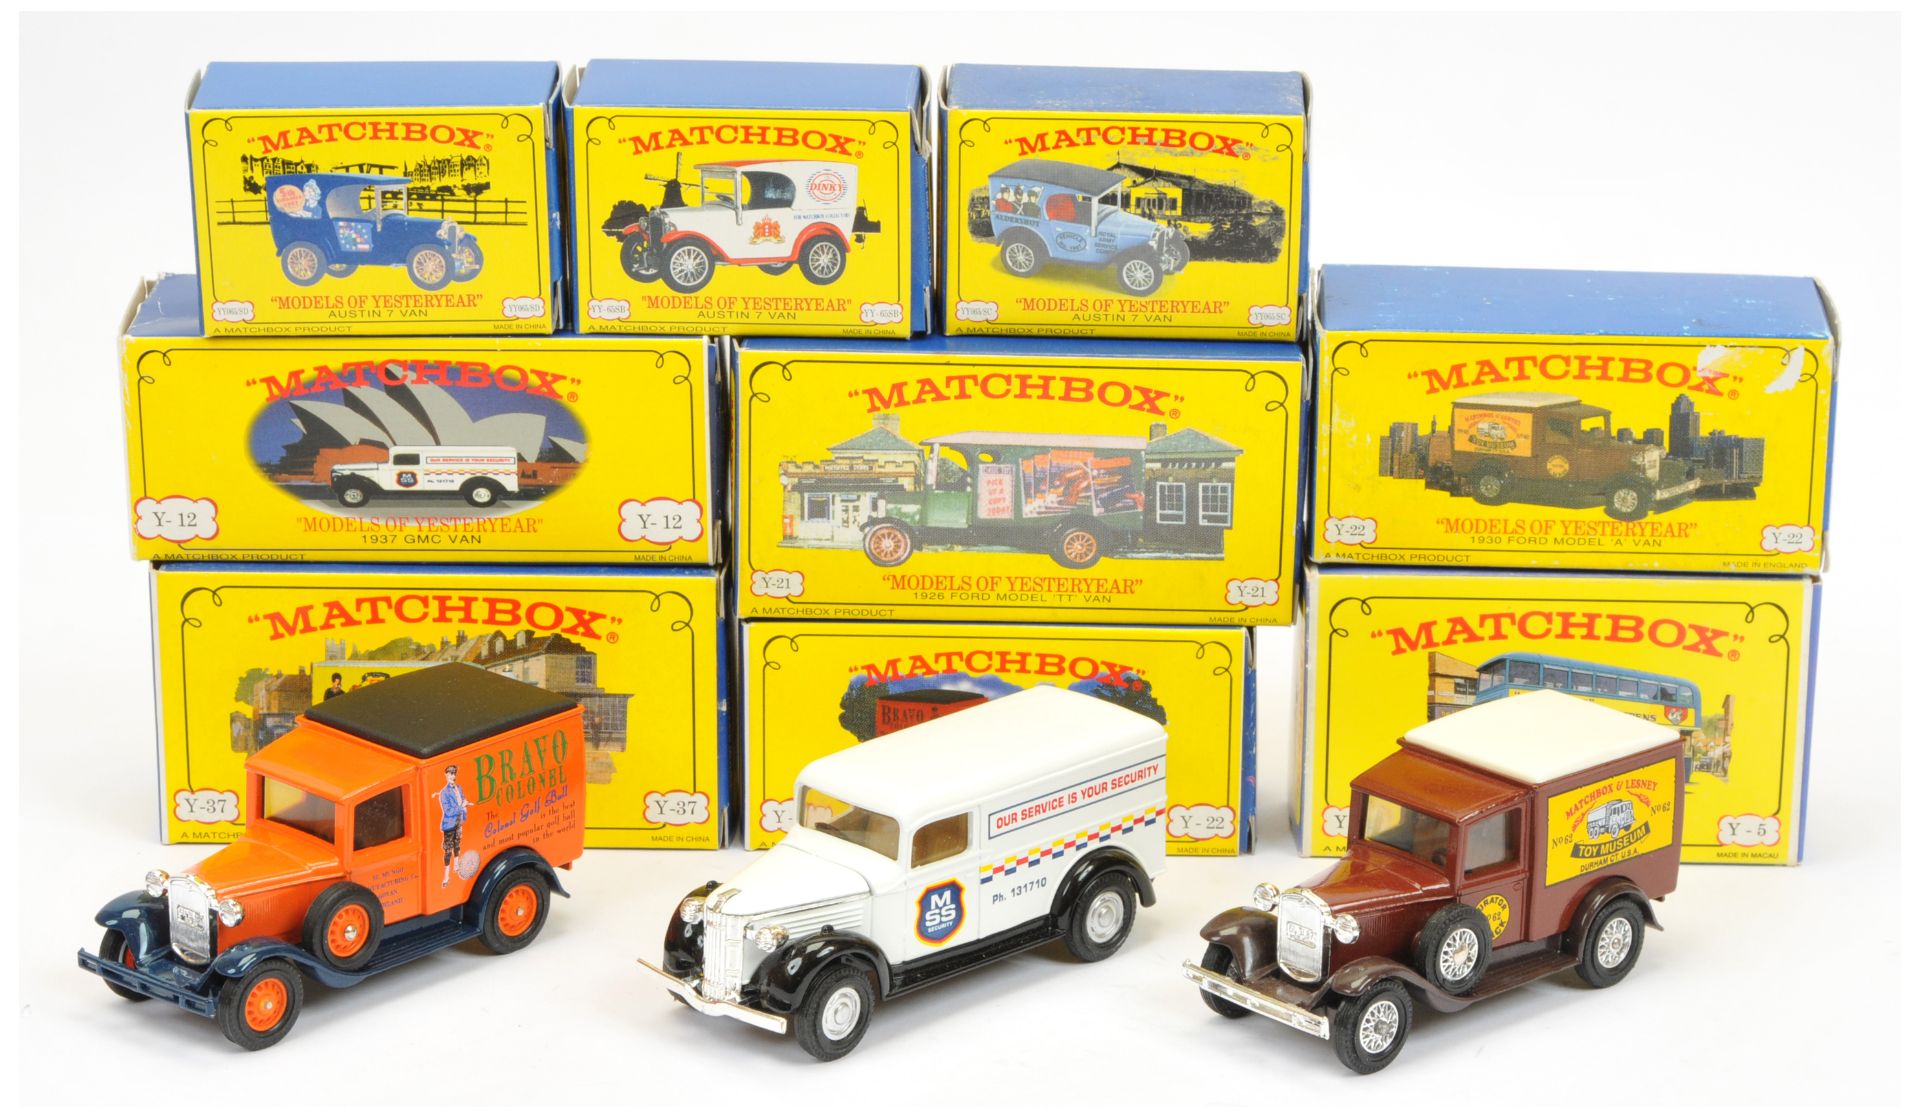 Matchbox Models of Yesteryear Code 2 issues Y12 1937 GMC Van "MSS Security" - white, Y22 1930 For...